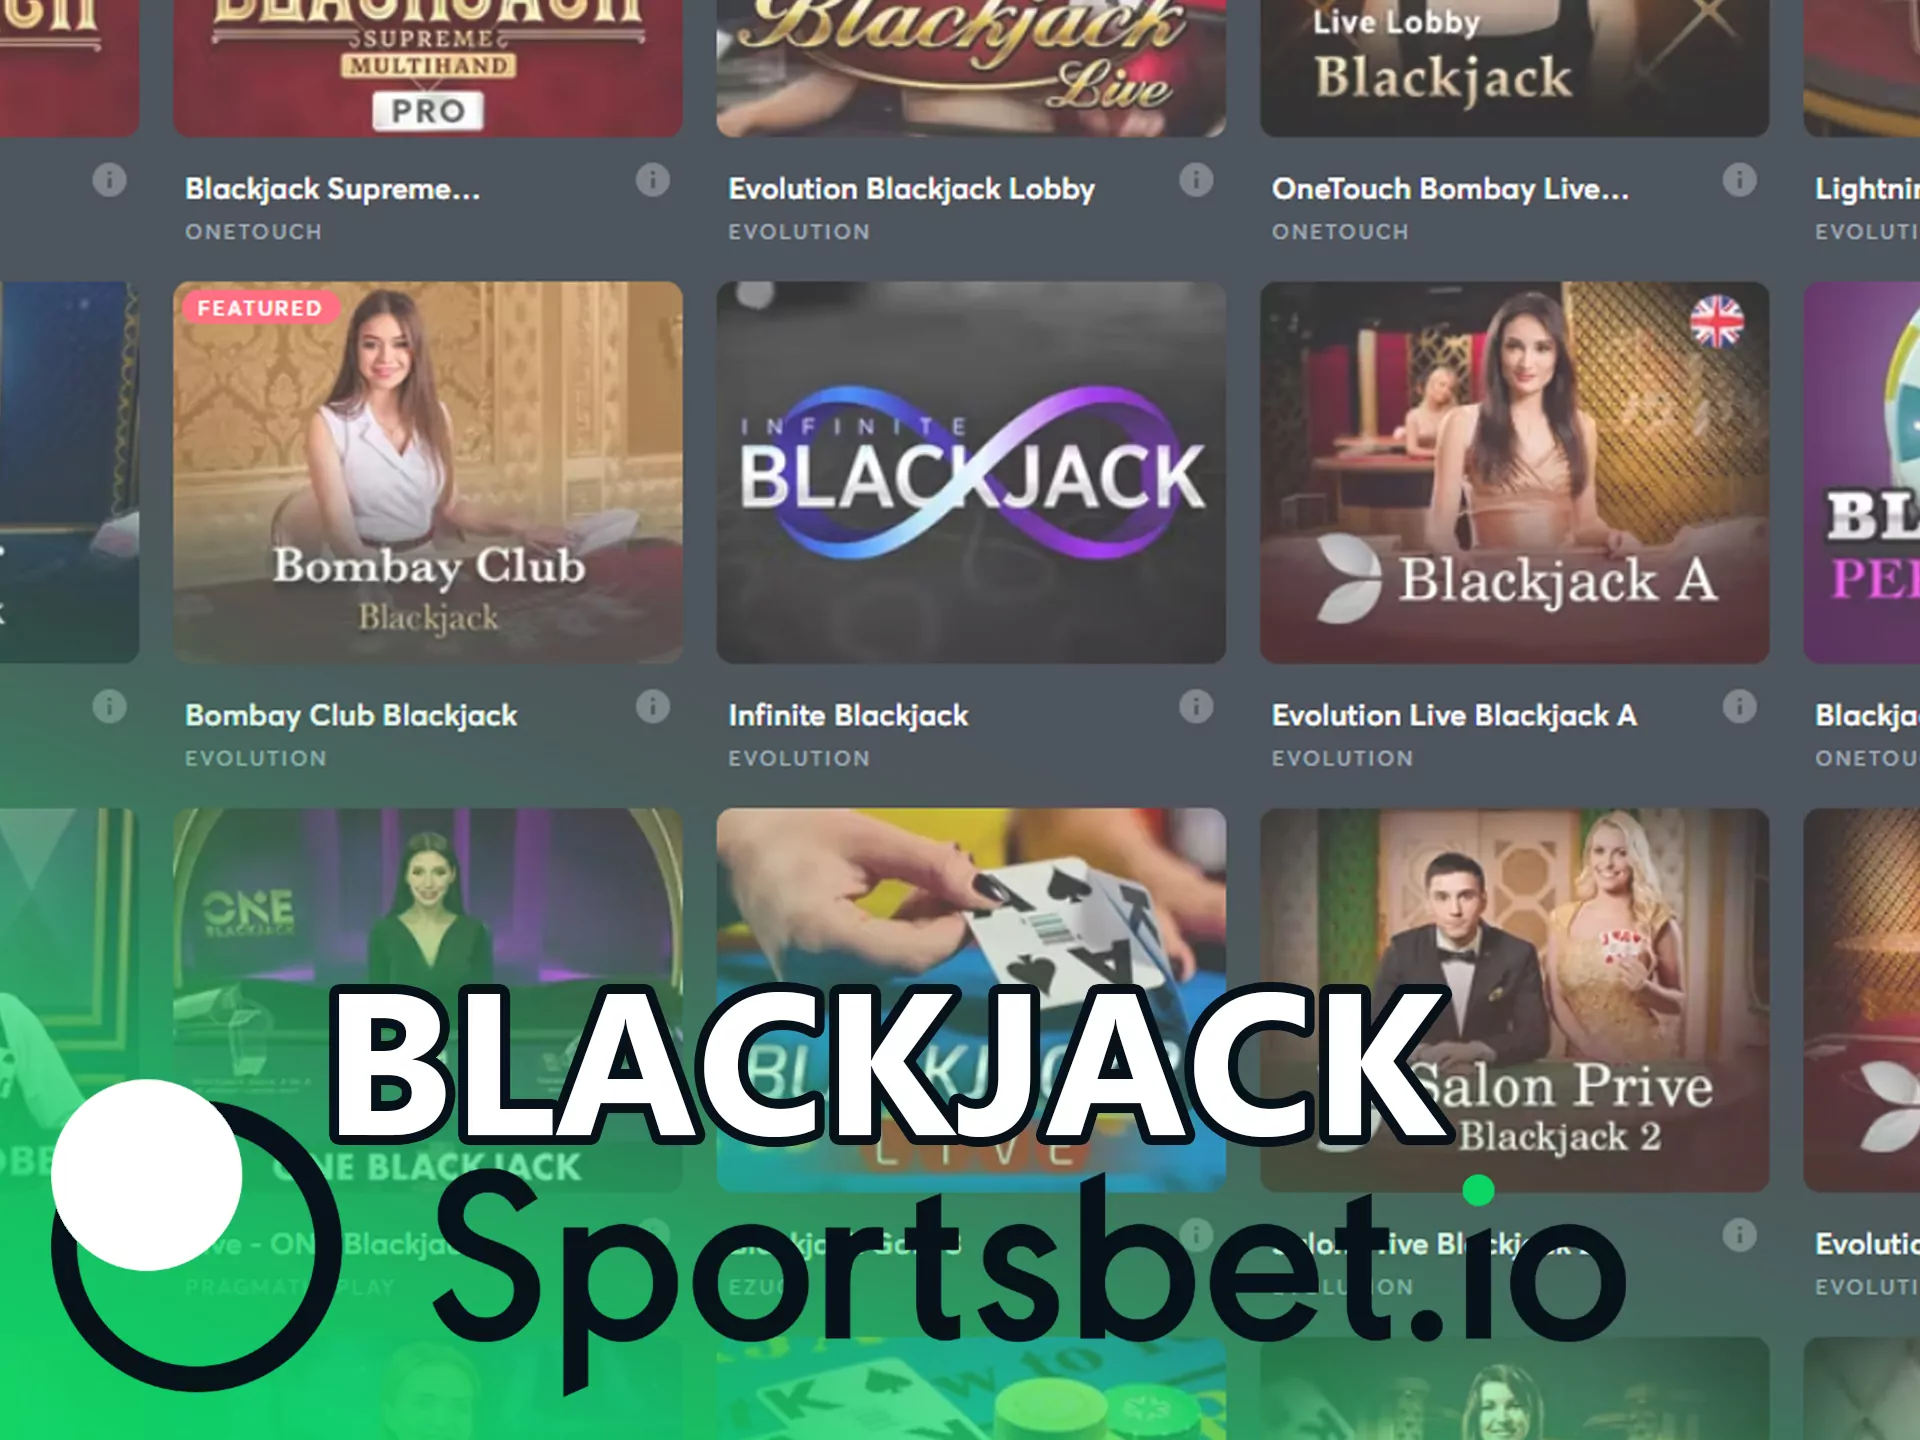 You can play one of the most popular casino game - blackjack.